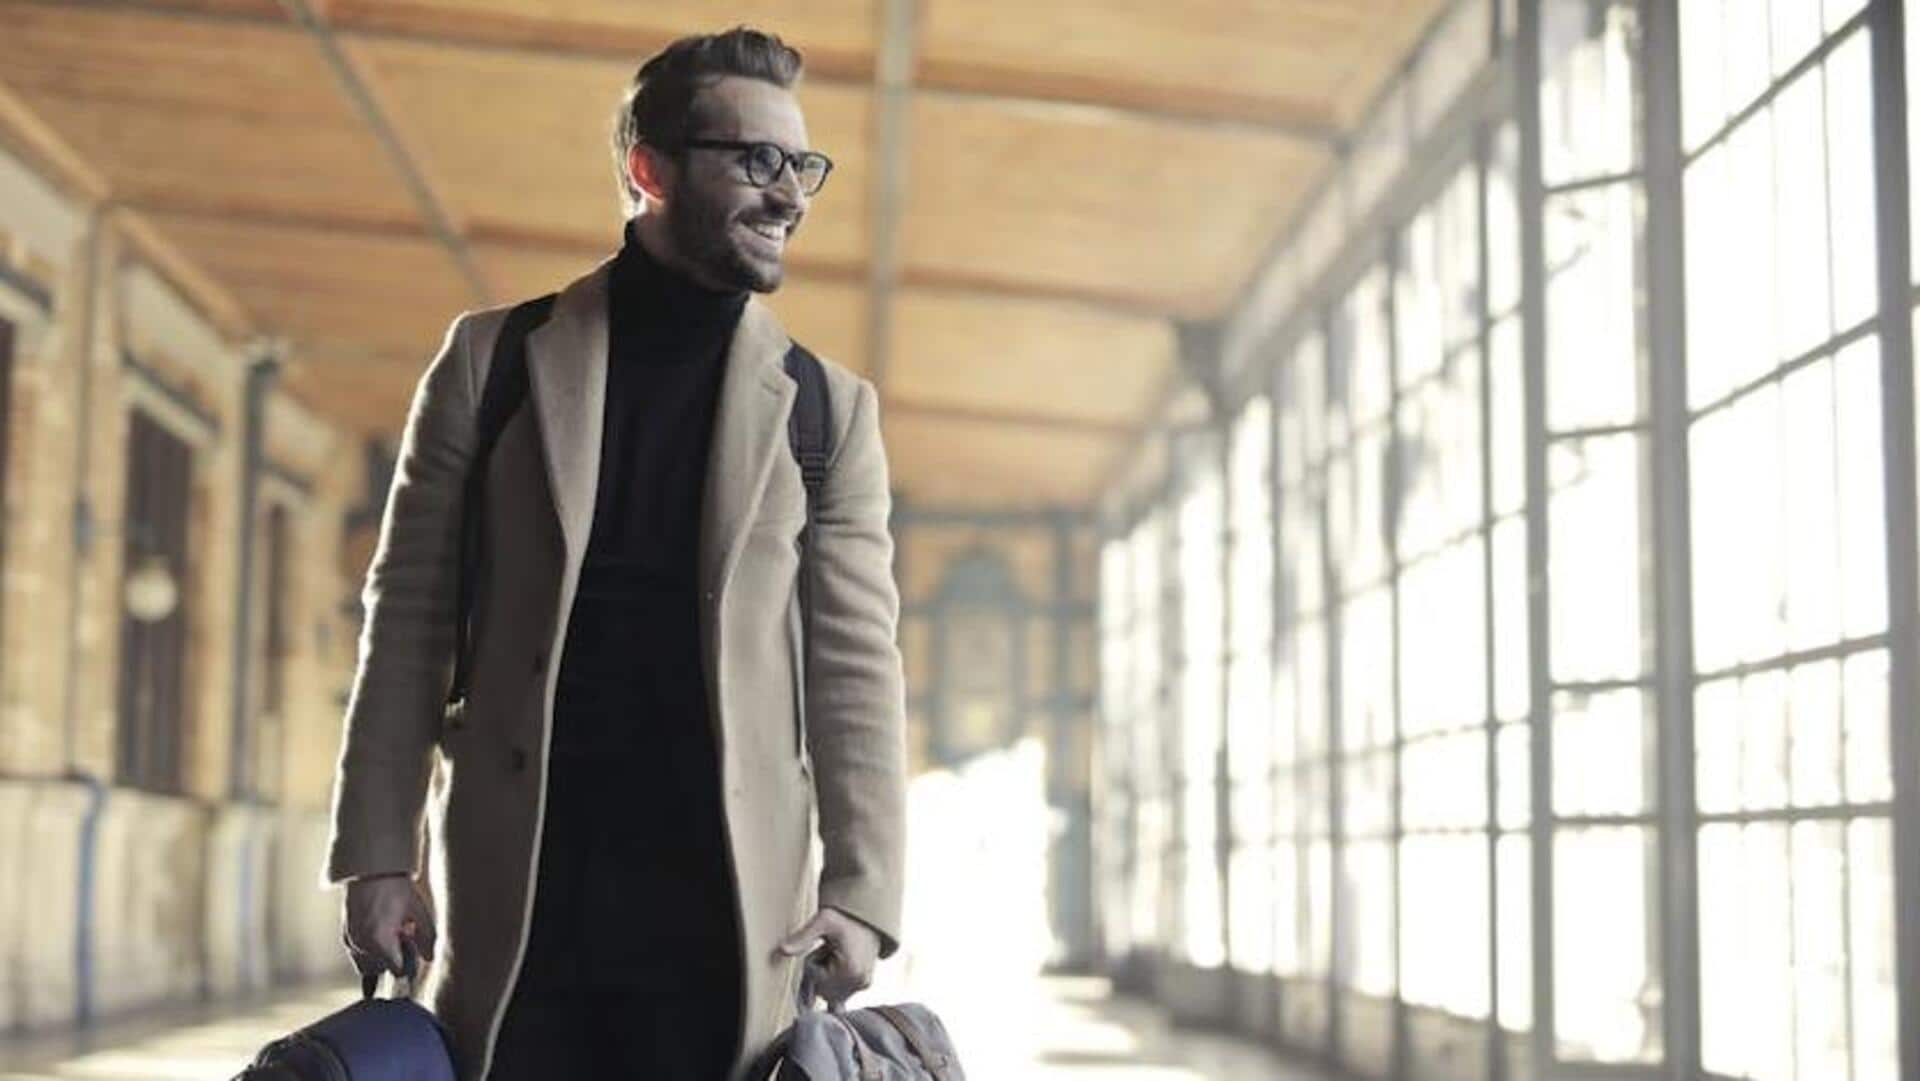 Winter fashion: Your guide to staying warm smartly this season 